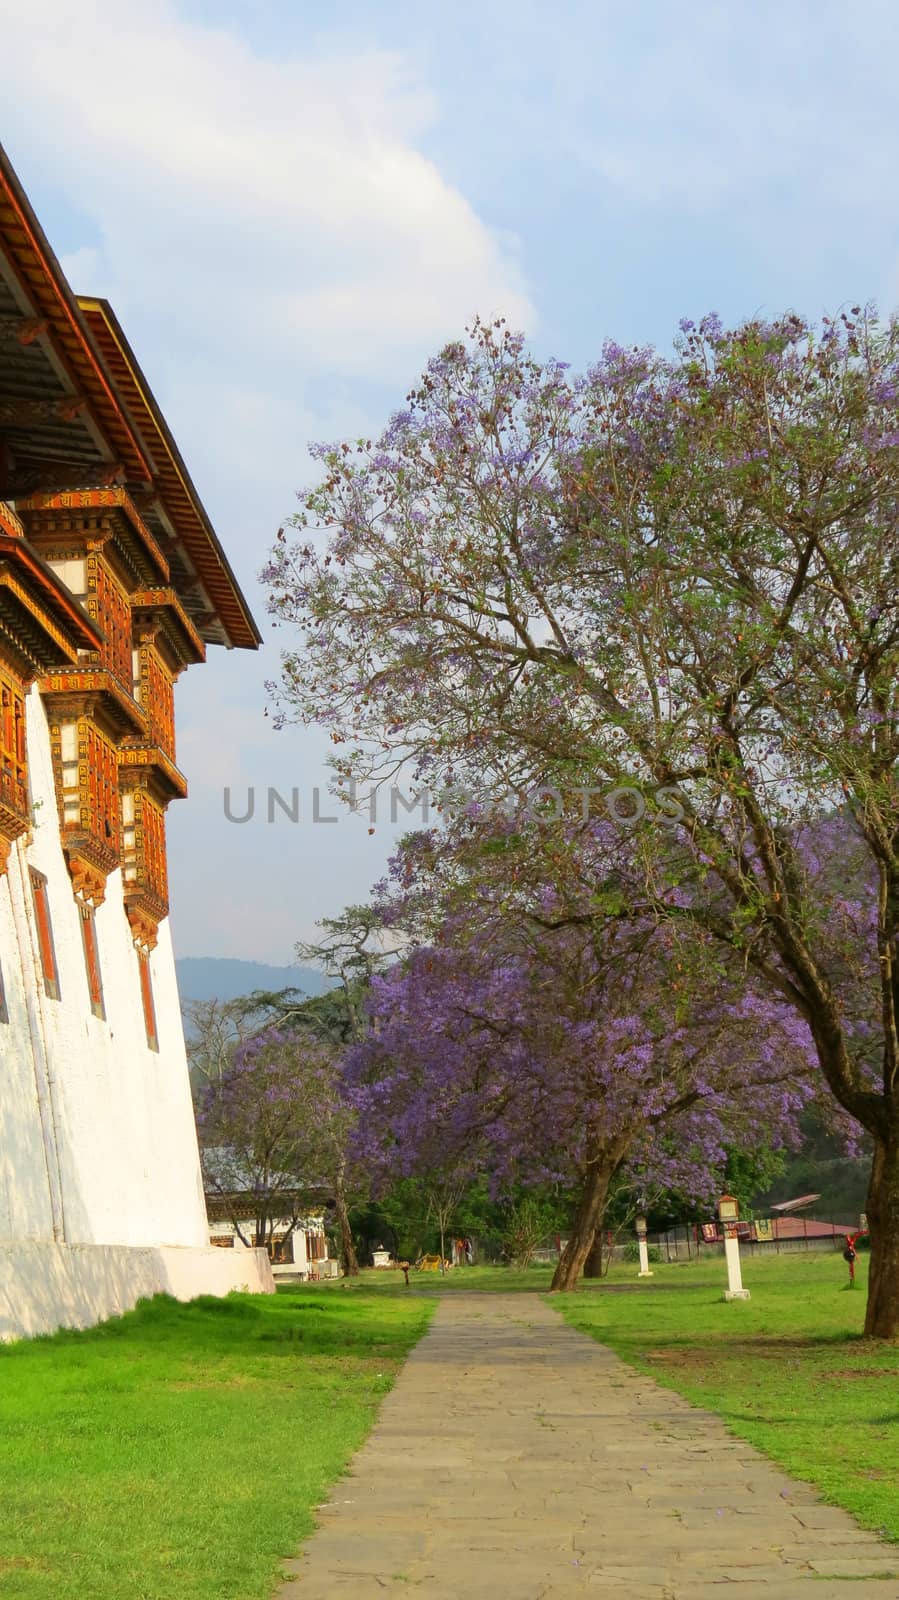 A beautiful path besides a monastery with trees having lavender colored flowers, in Bhutan                               